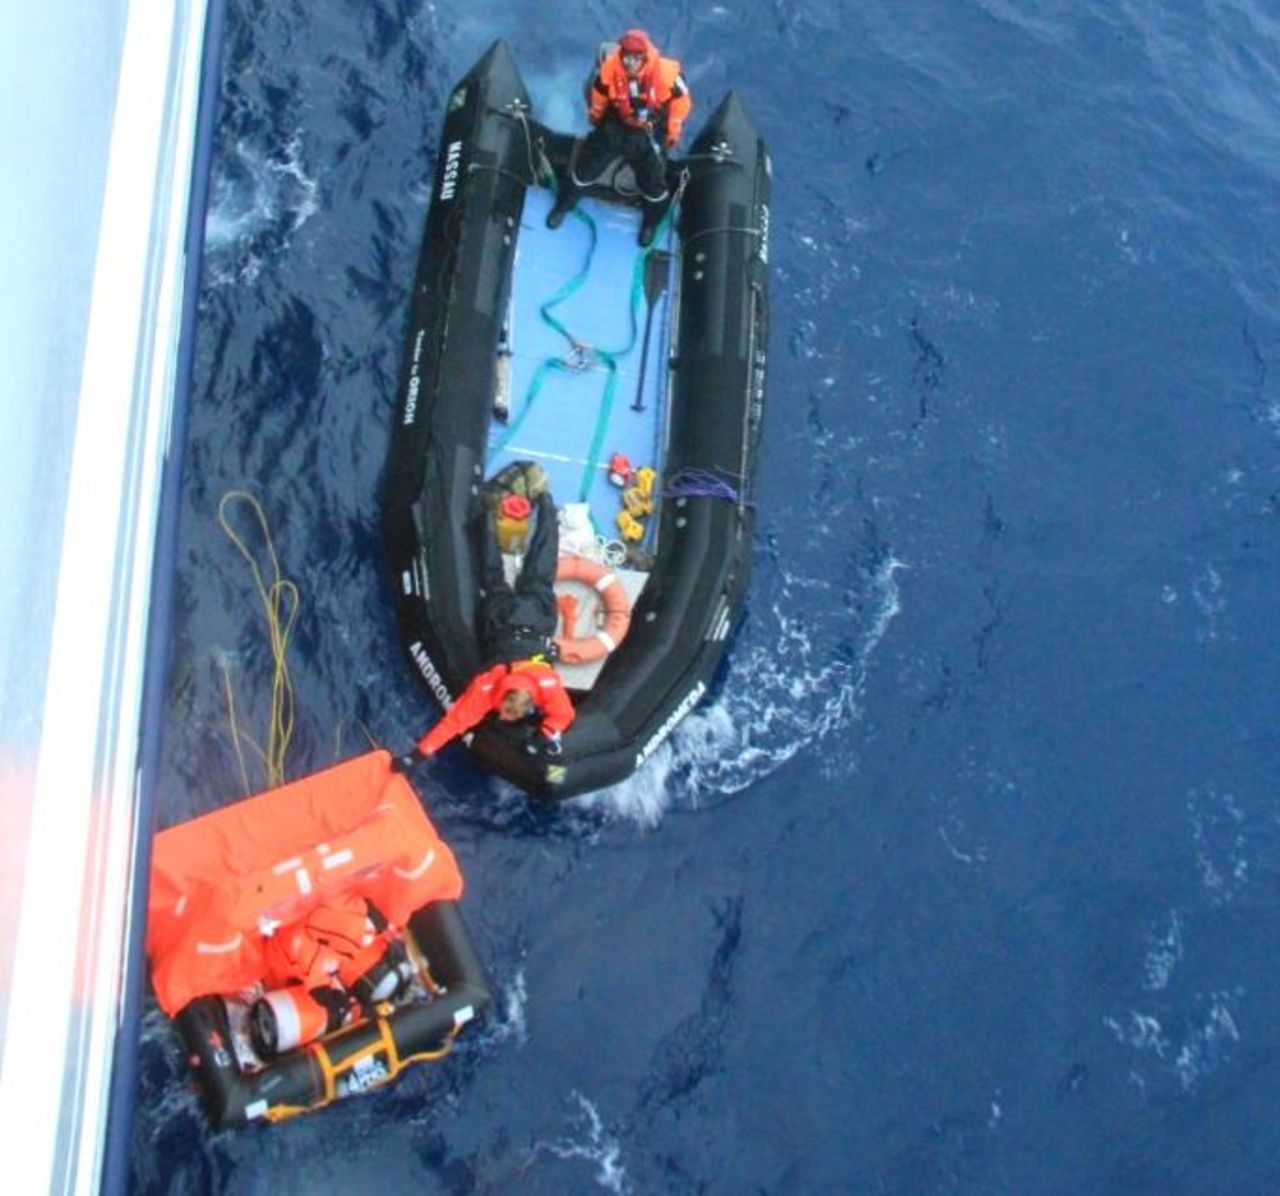 A rescue boat from cruise ship Orion reaches Alain Delord's life raft  on Sunday.